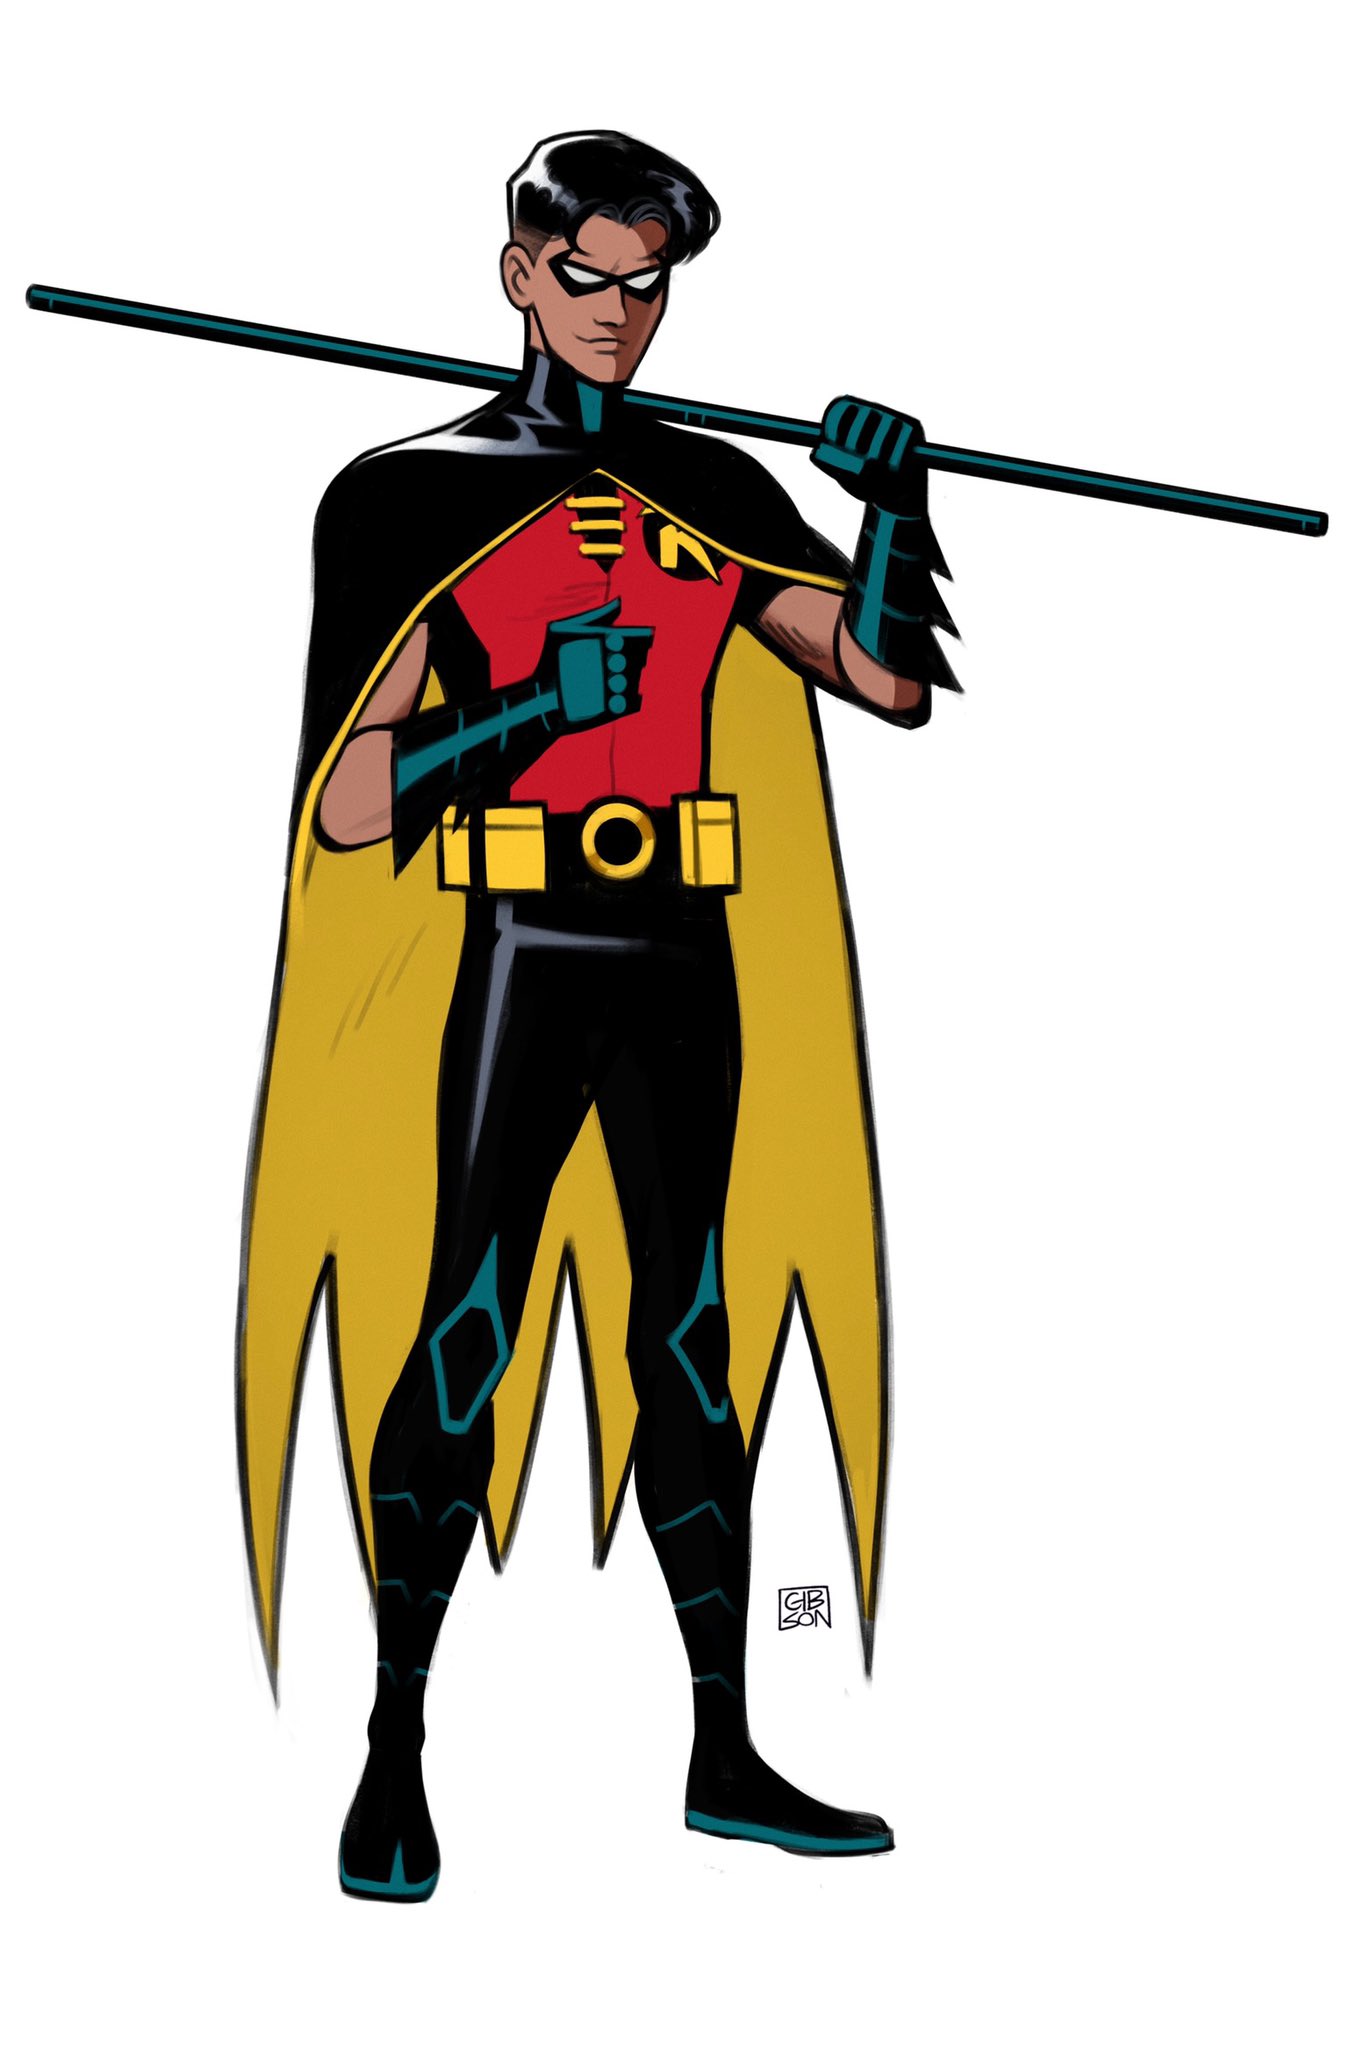 jordangibson.bsky.social on Twitter: "Took a shot at drawing Tim Drake in his modern Robin costume. I had to push the cape a little more Gatchaman than Batman. https://t.co/iLTQdb1M4o" X